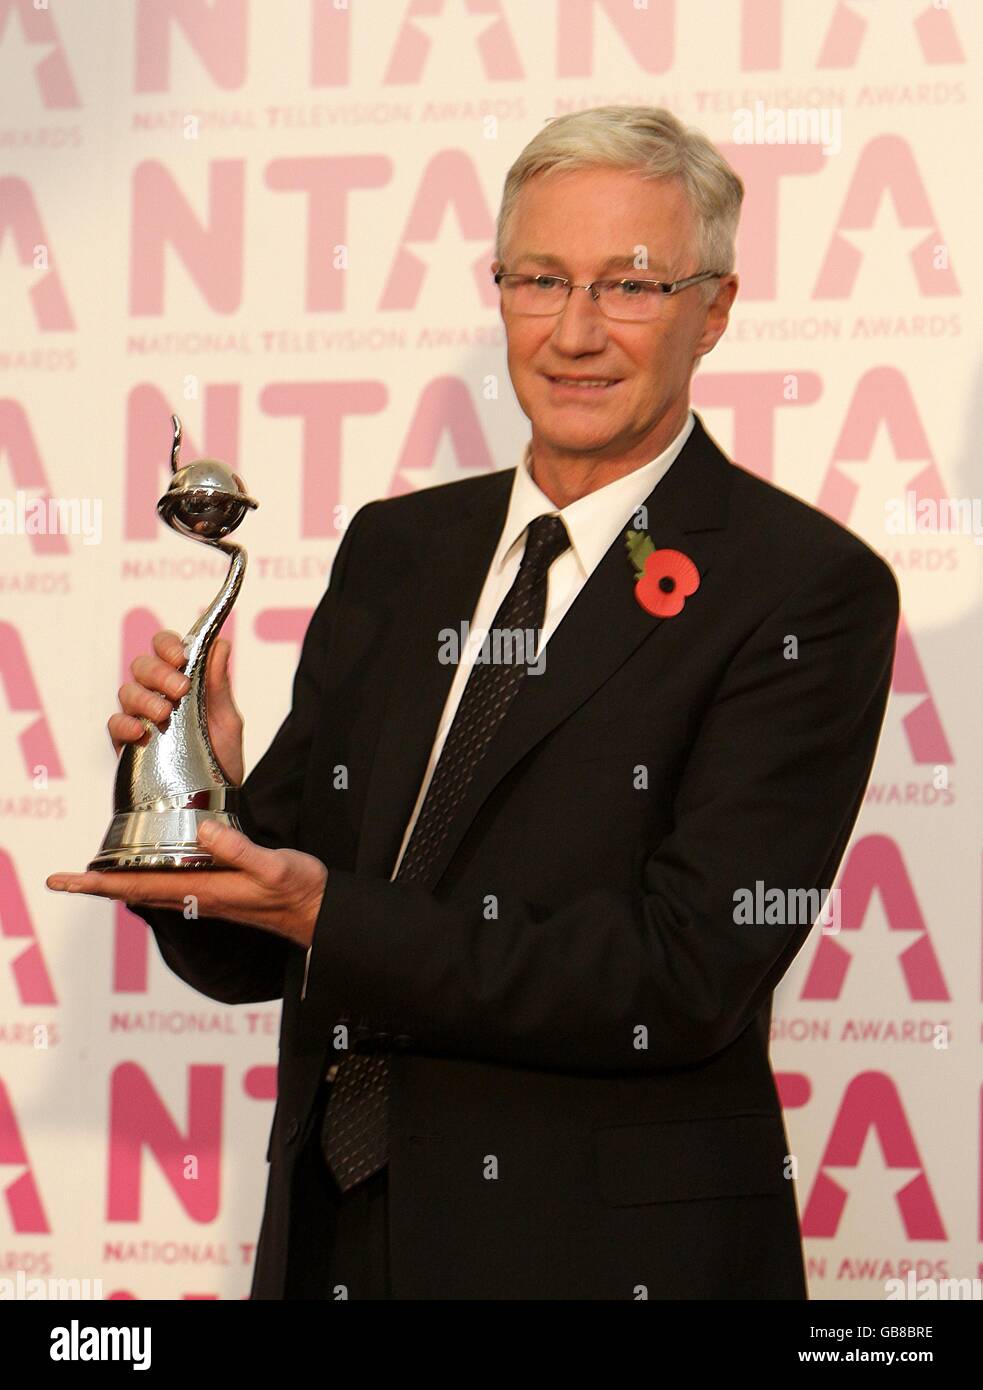 Paul O'Grady with his award for Most Popular Entertainmnet Programme, at the 2008 National Television Awards at the Royal Albert Hall, Kensington Gore, SW7. Stock Photo